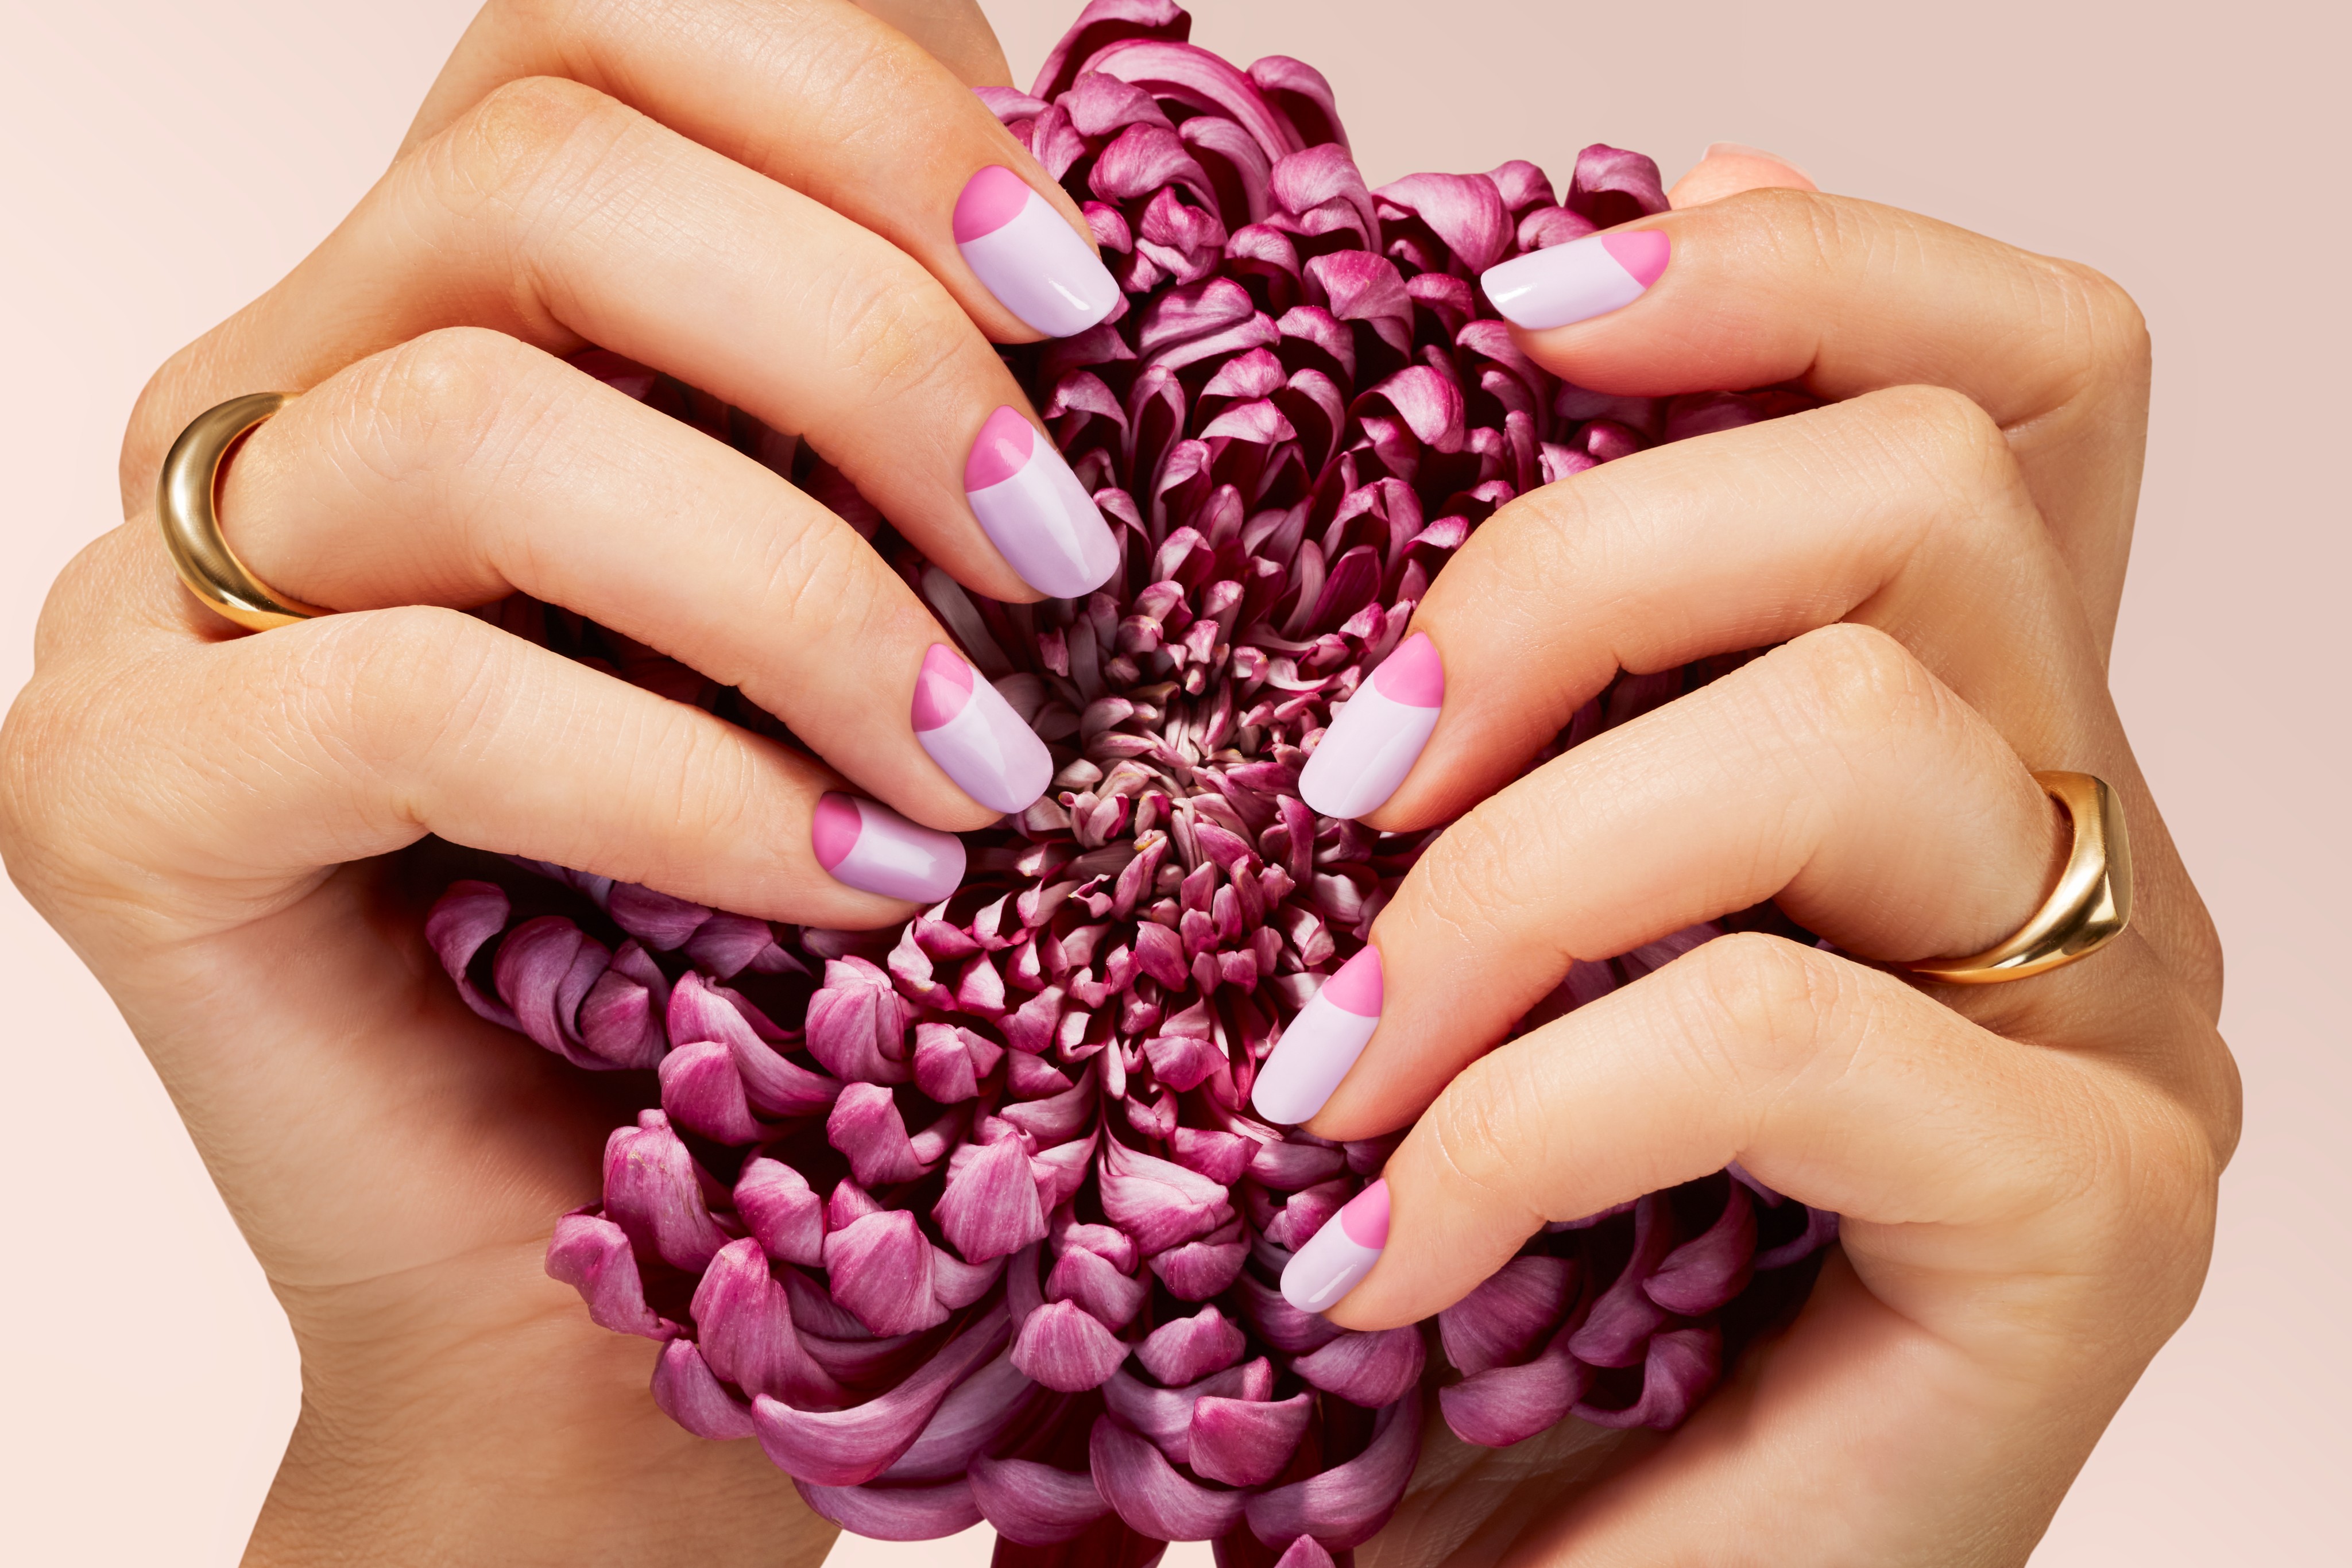 Nails-beautyvisual-spring-lilac-reverse-french-purple-flower-golden-rings-122023-Web-Rendition